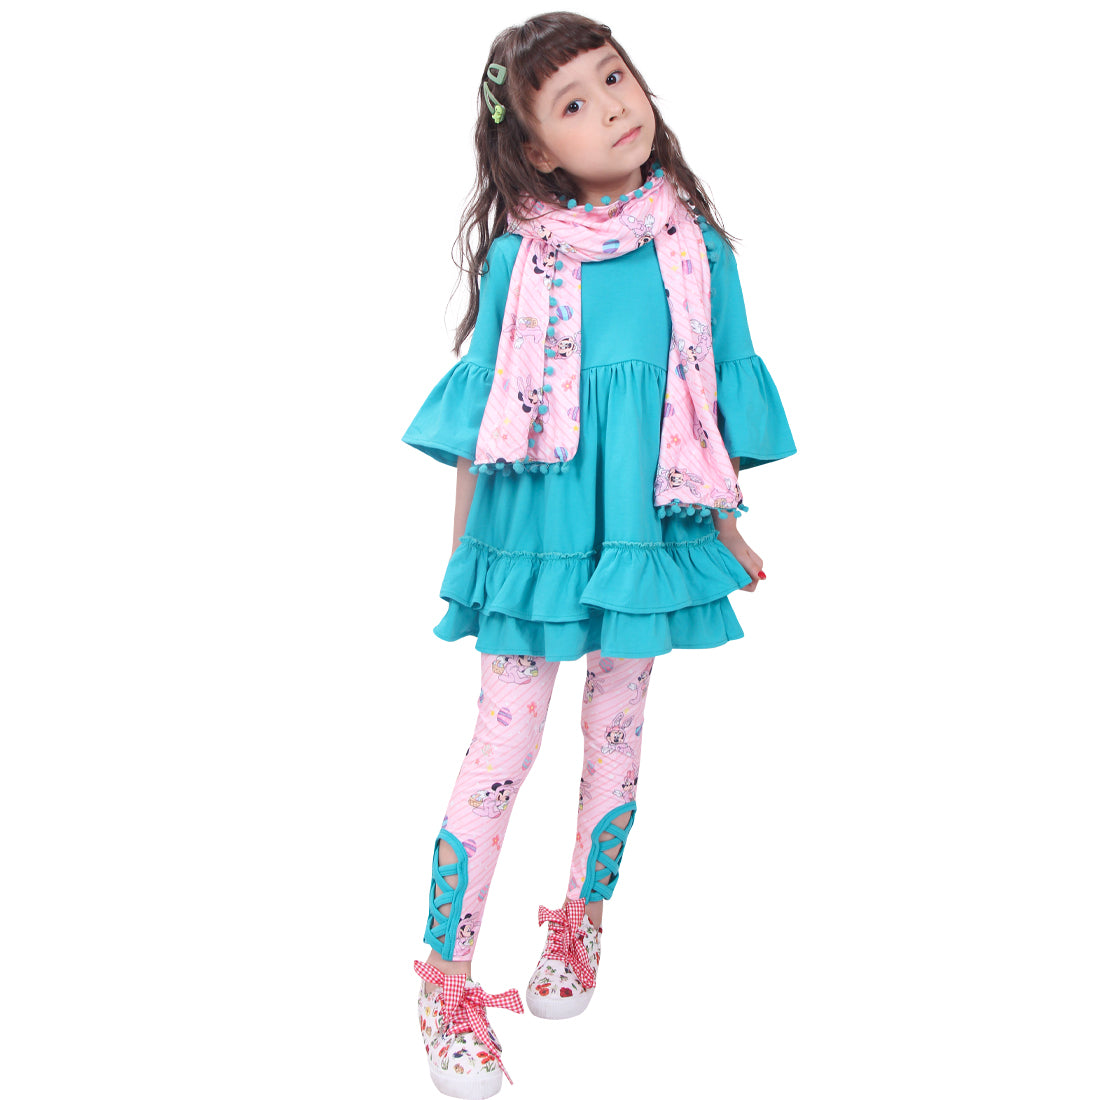 Toddler Little Girls Disney Inspired Minnie Easter Outfit with Scarf - Pink Turquoise - Angeline Kids